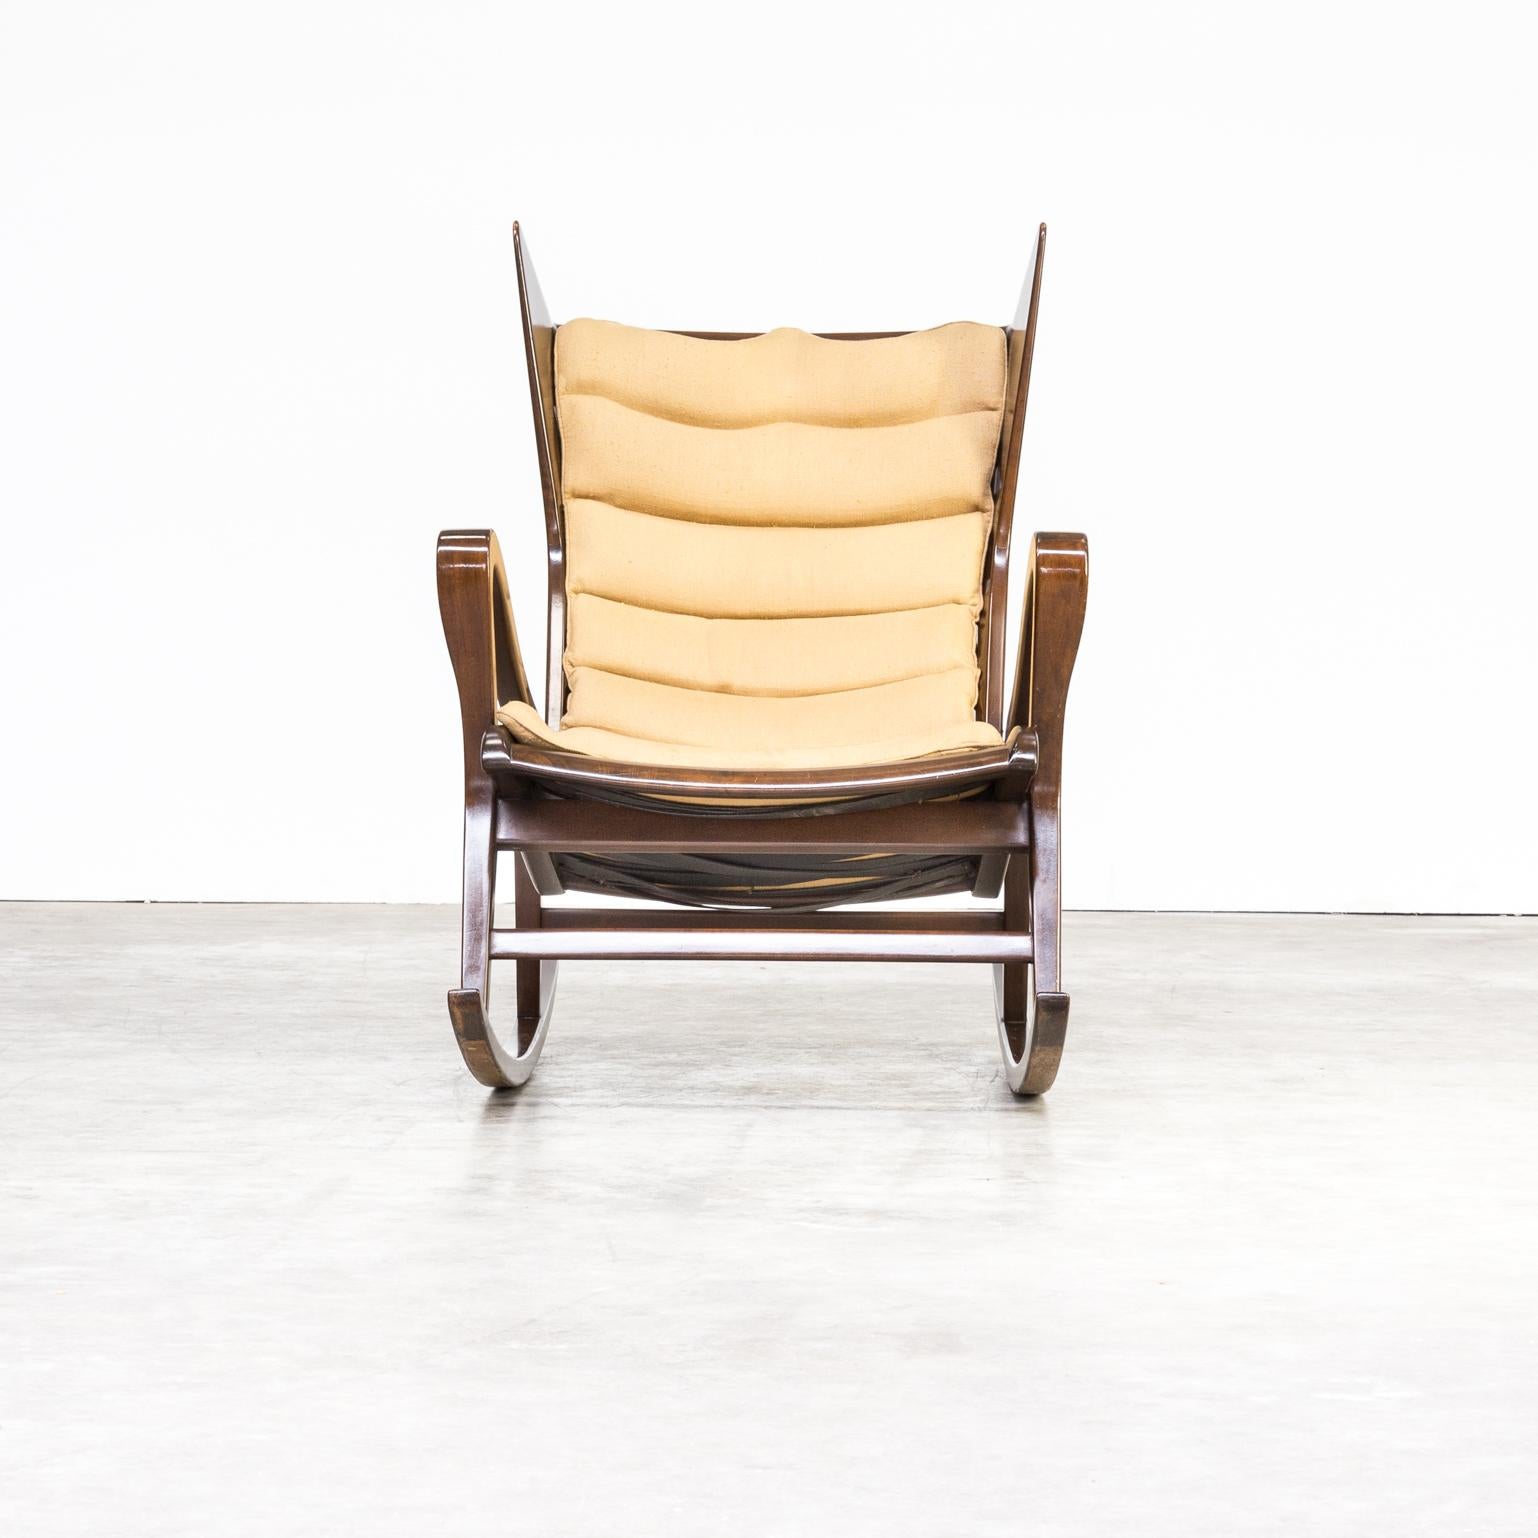 An very rare rocking chair attributed to Gio Ponti in walnut, leather singles and fabric for Cassina, Italy, 1950s. Exquisite production techniques used which are shown by the beautiful wooden details throughout the whole design. Original upholstery